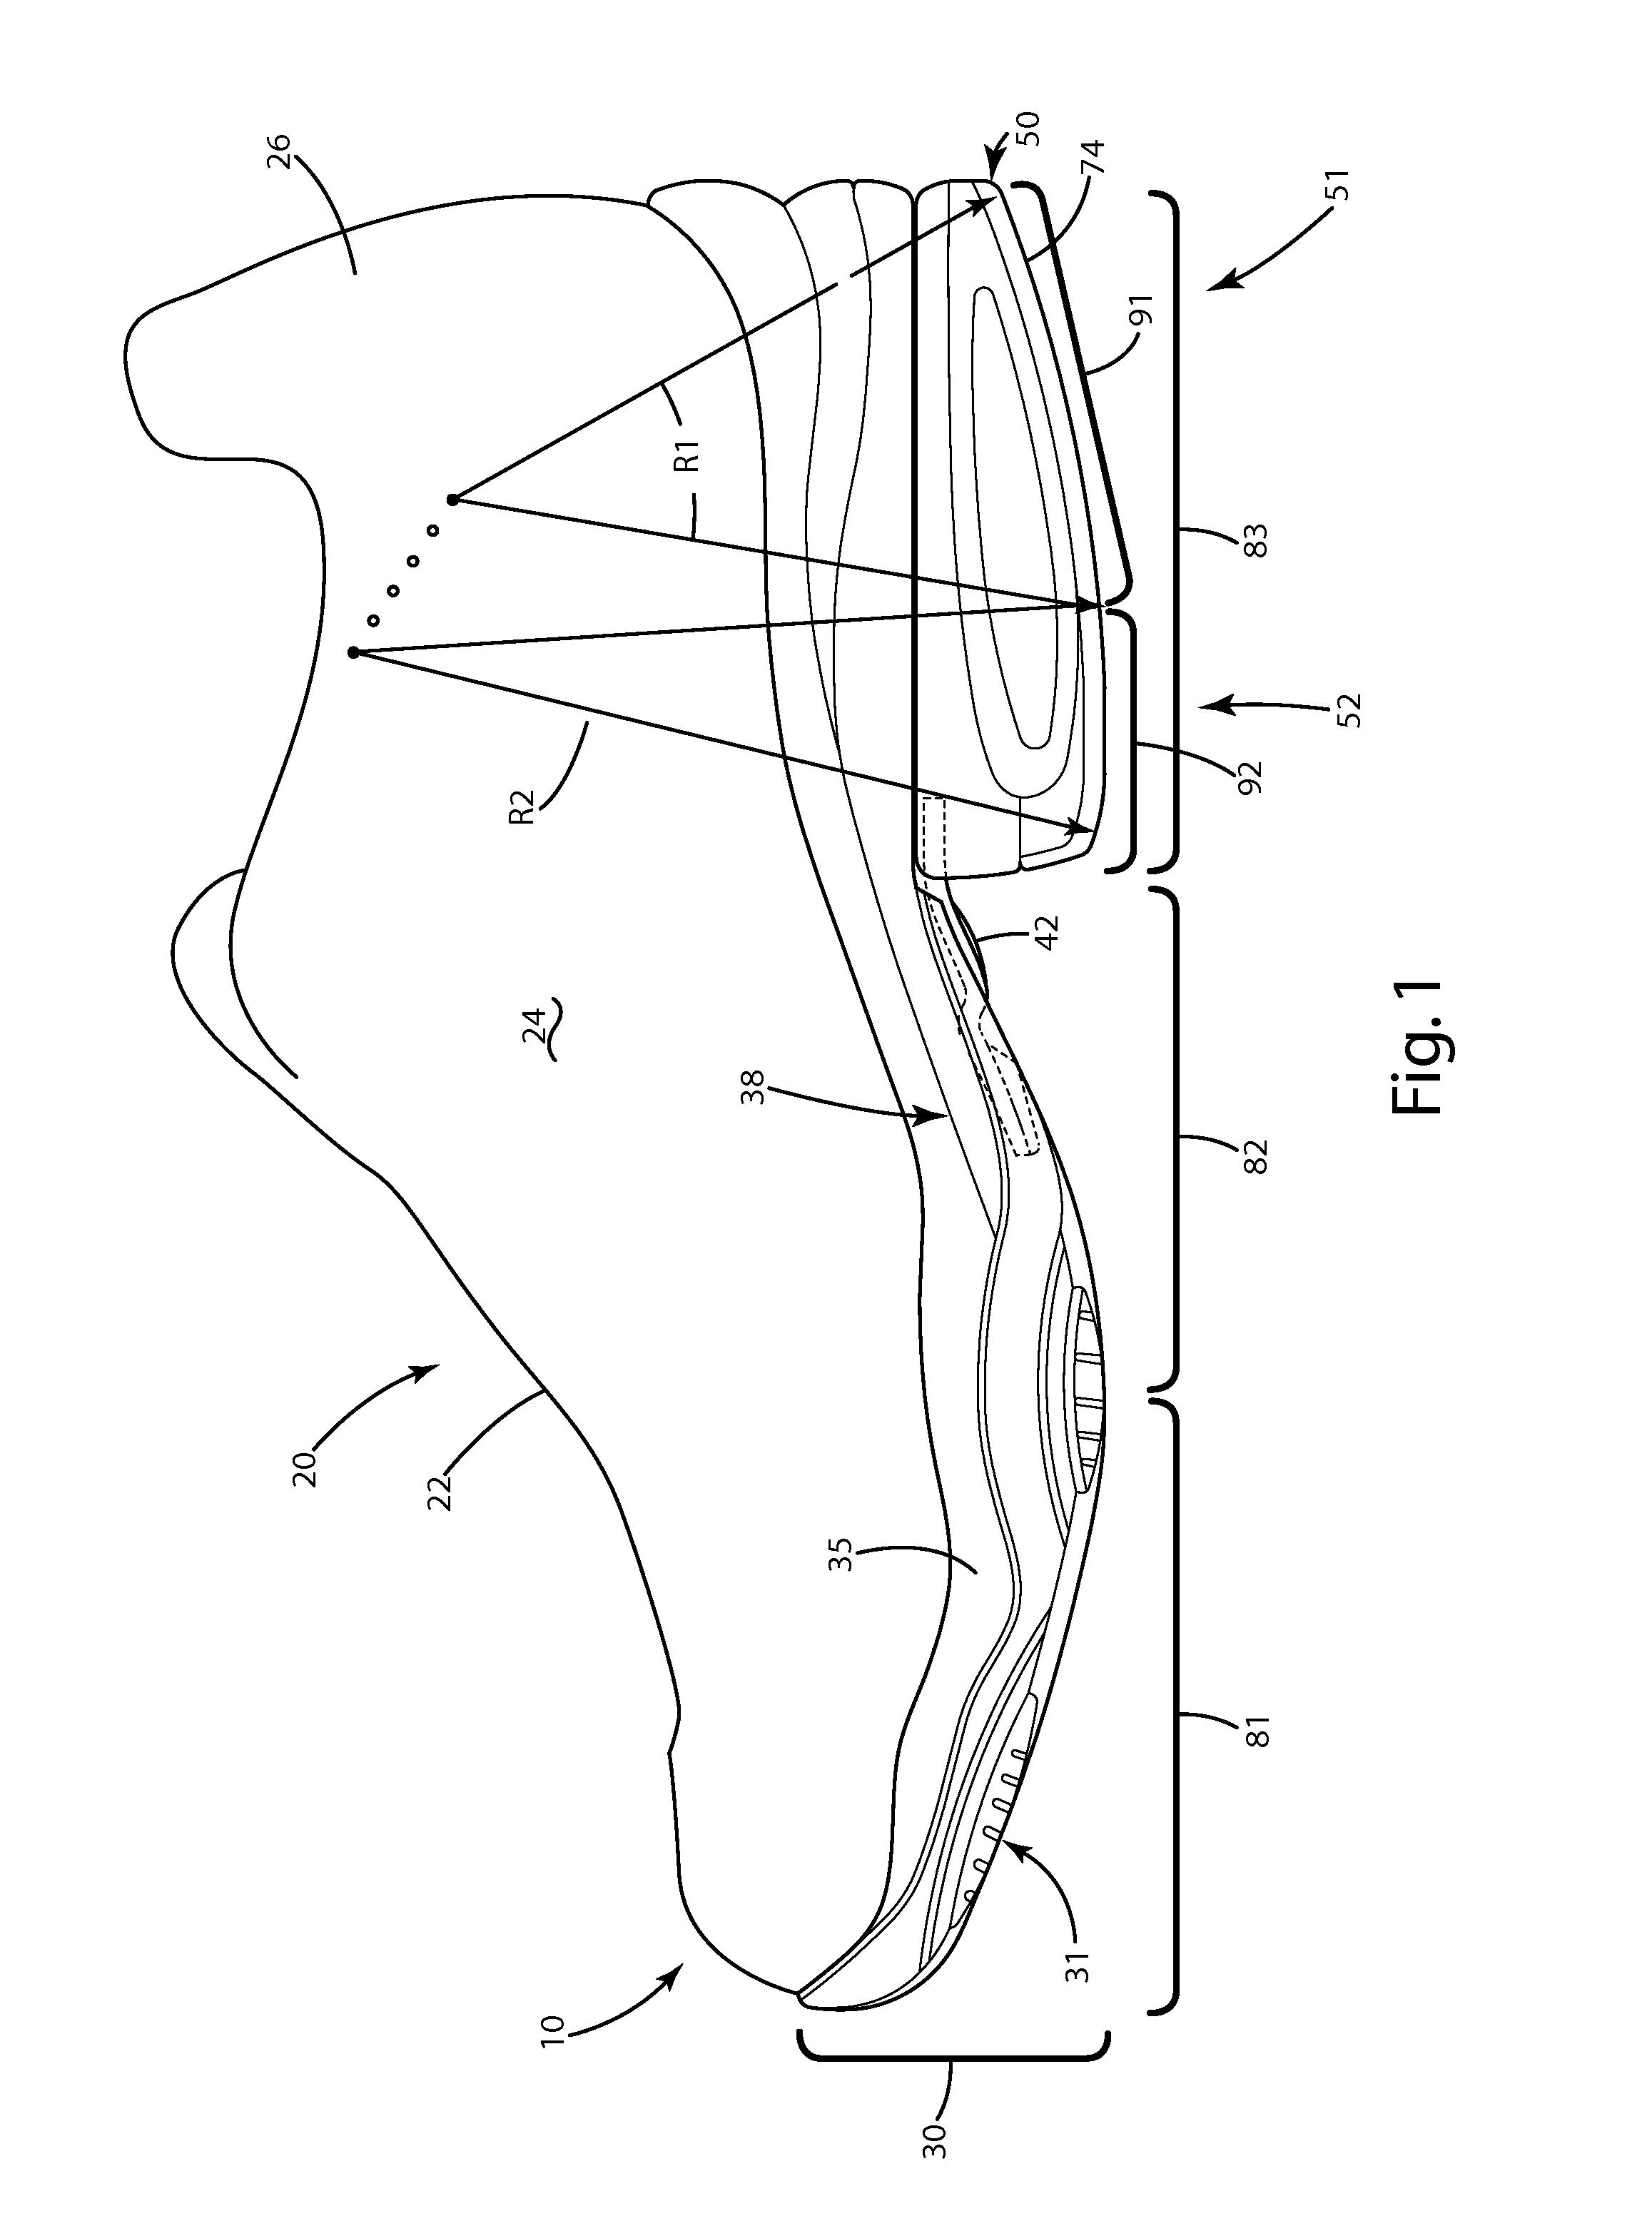 Adjustable footwear sole construction and related methods of use